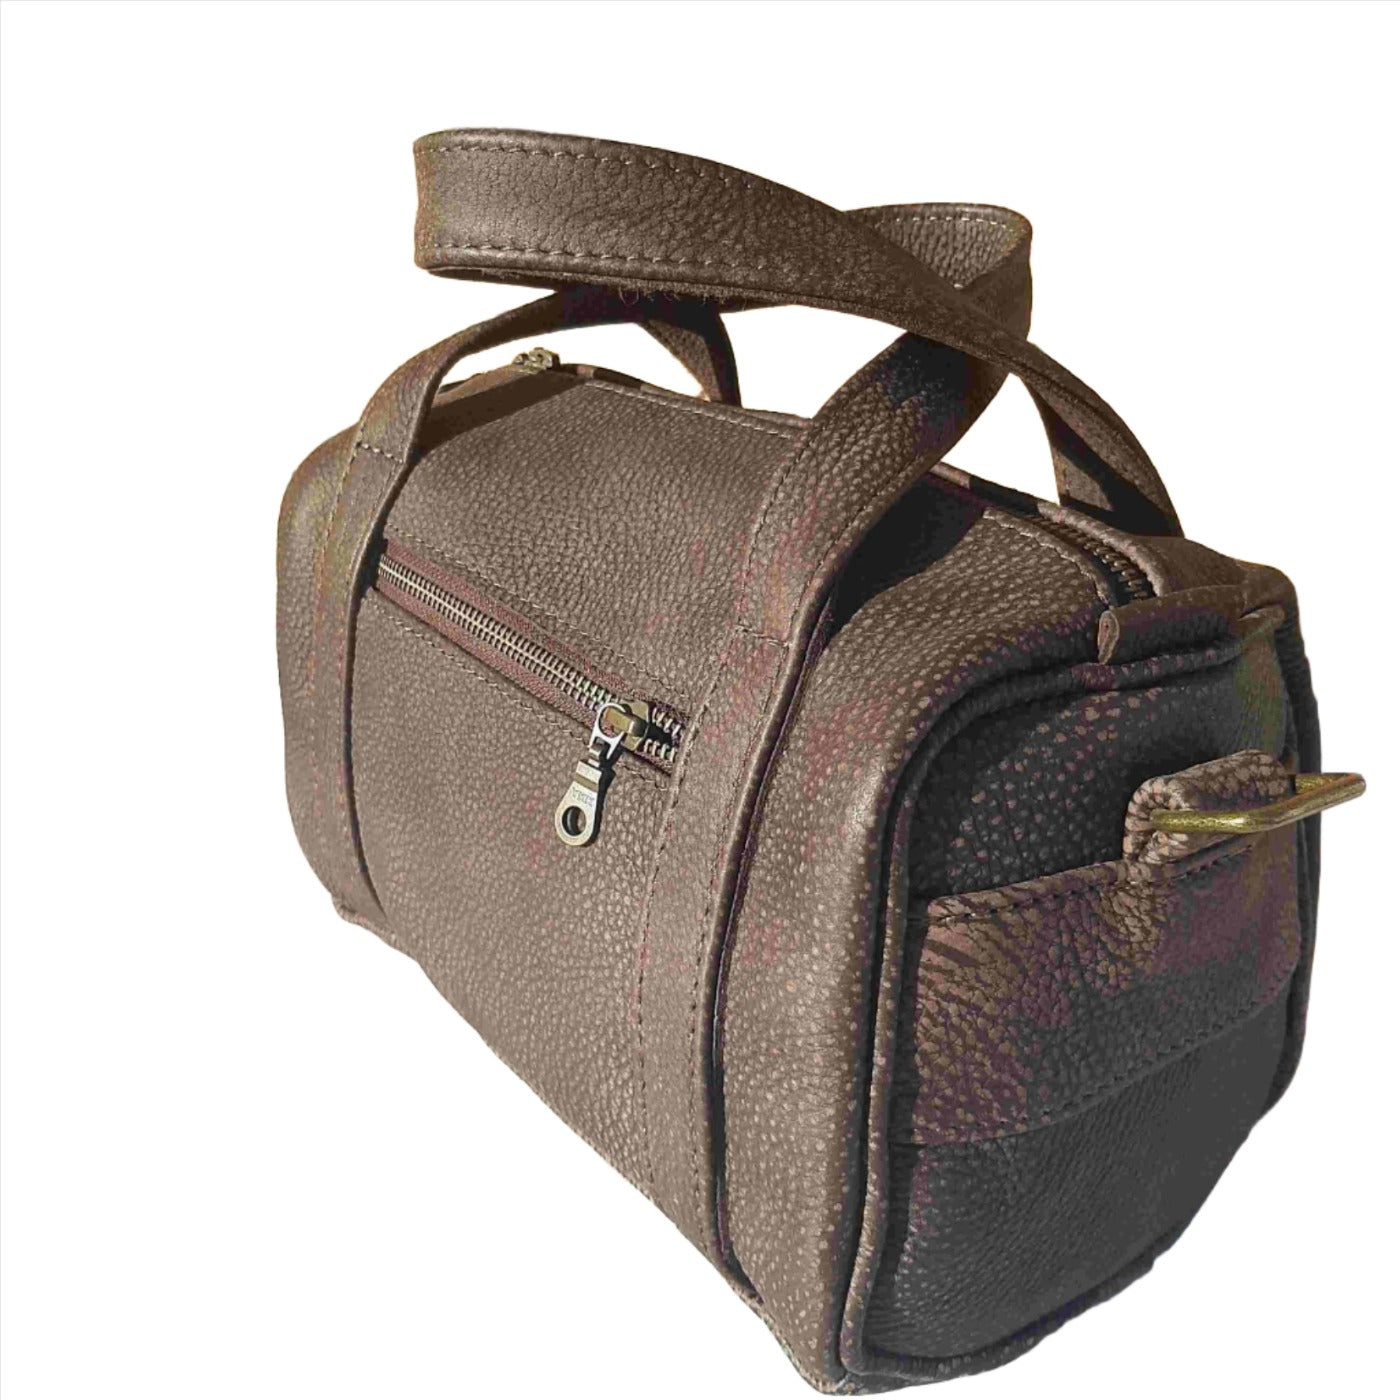 Alex Bathroom bags with Strap in Woodland's baffola colour  from Cape Masai Leather 